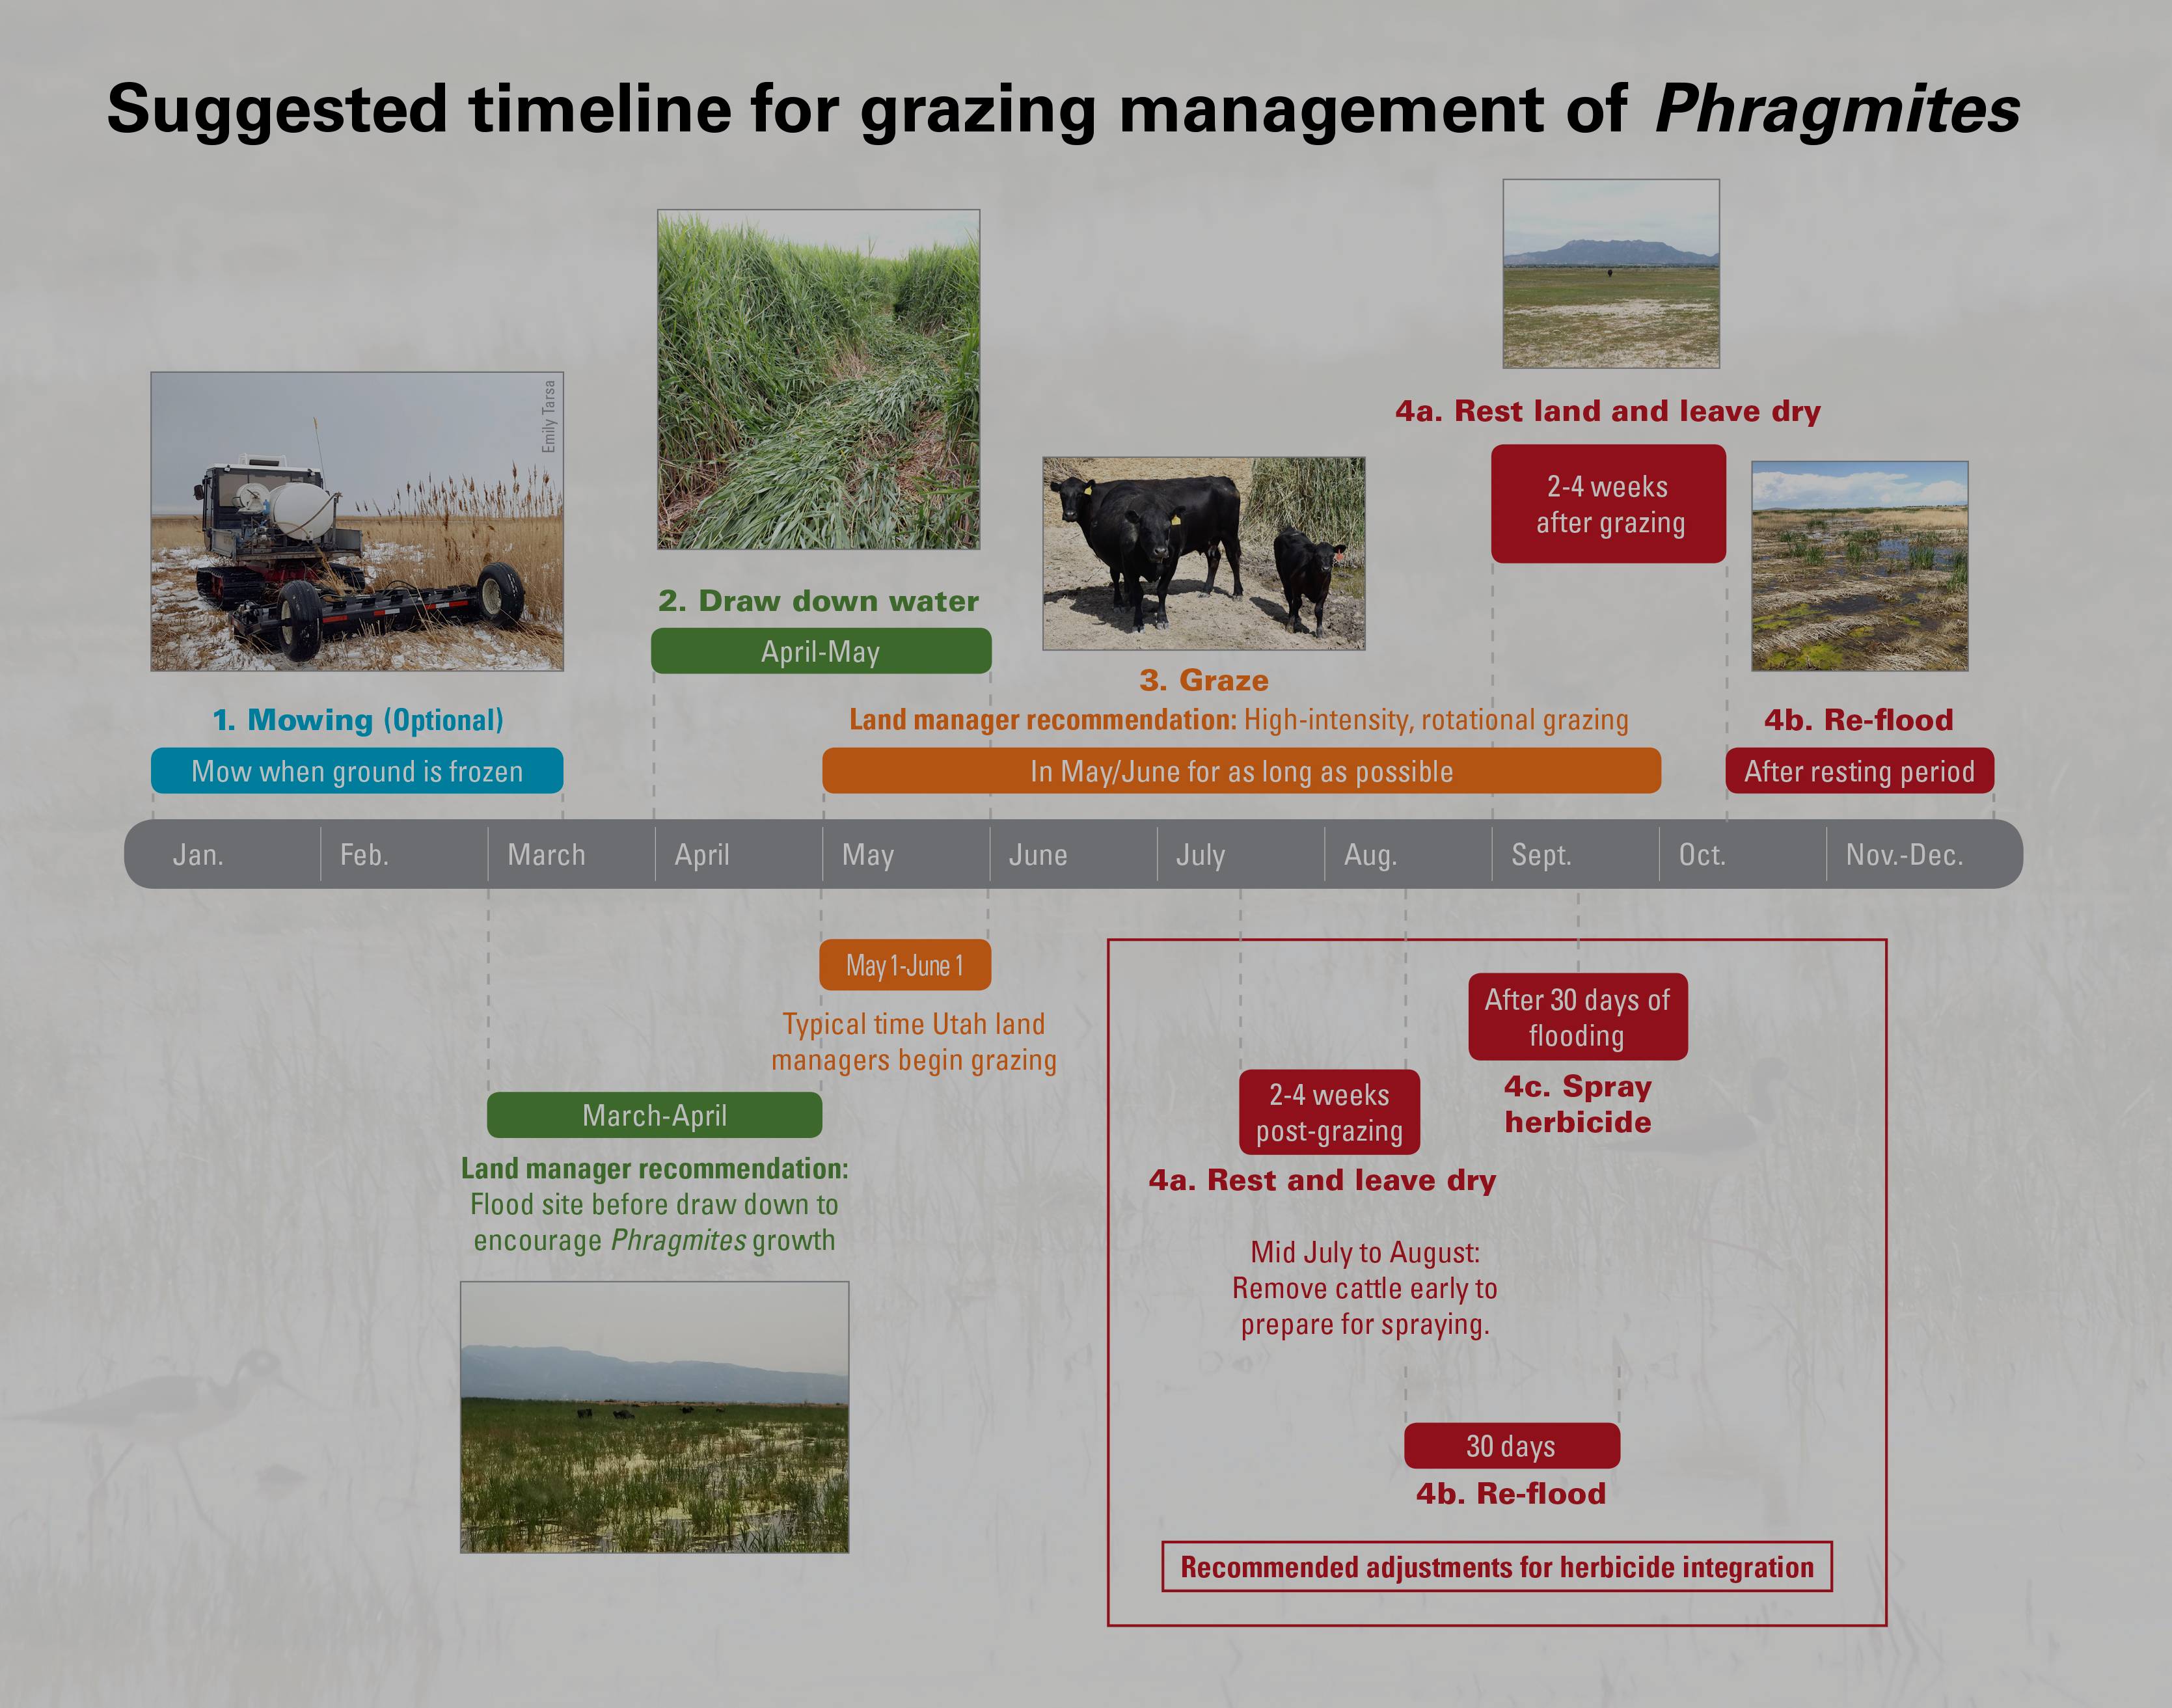 Suggested timeline for grazing management of phragmites